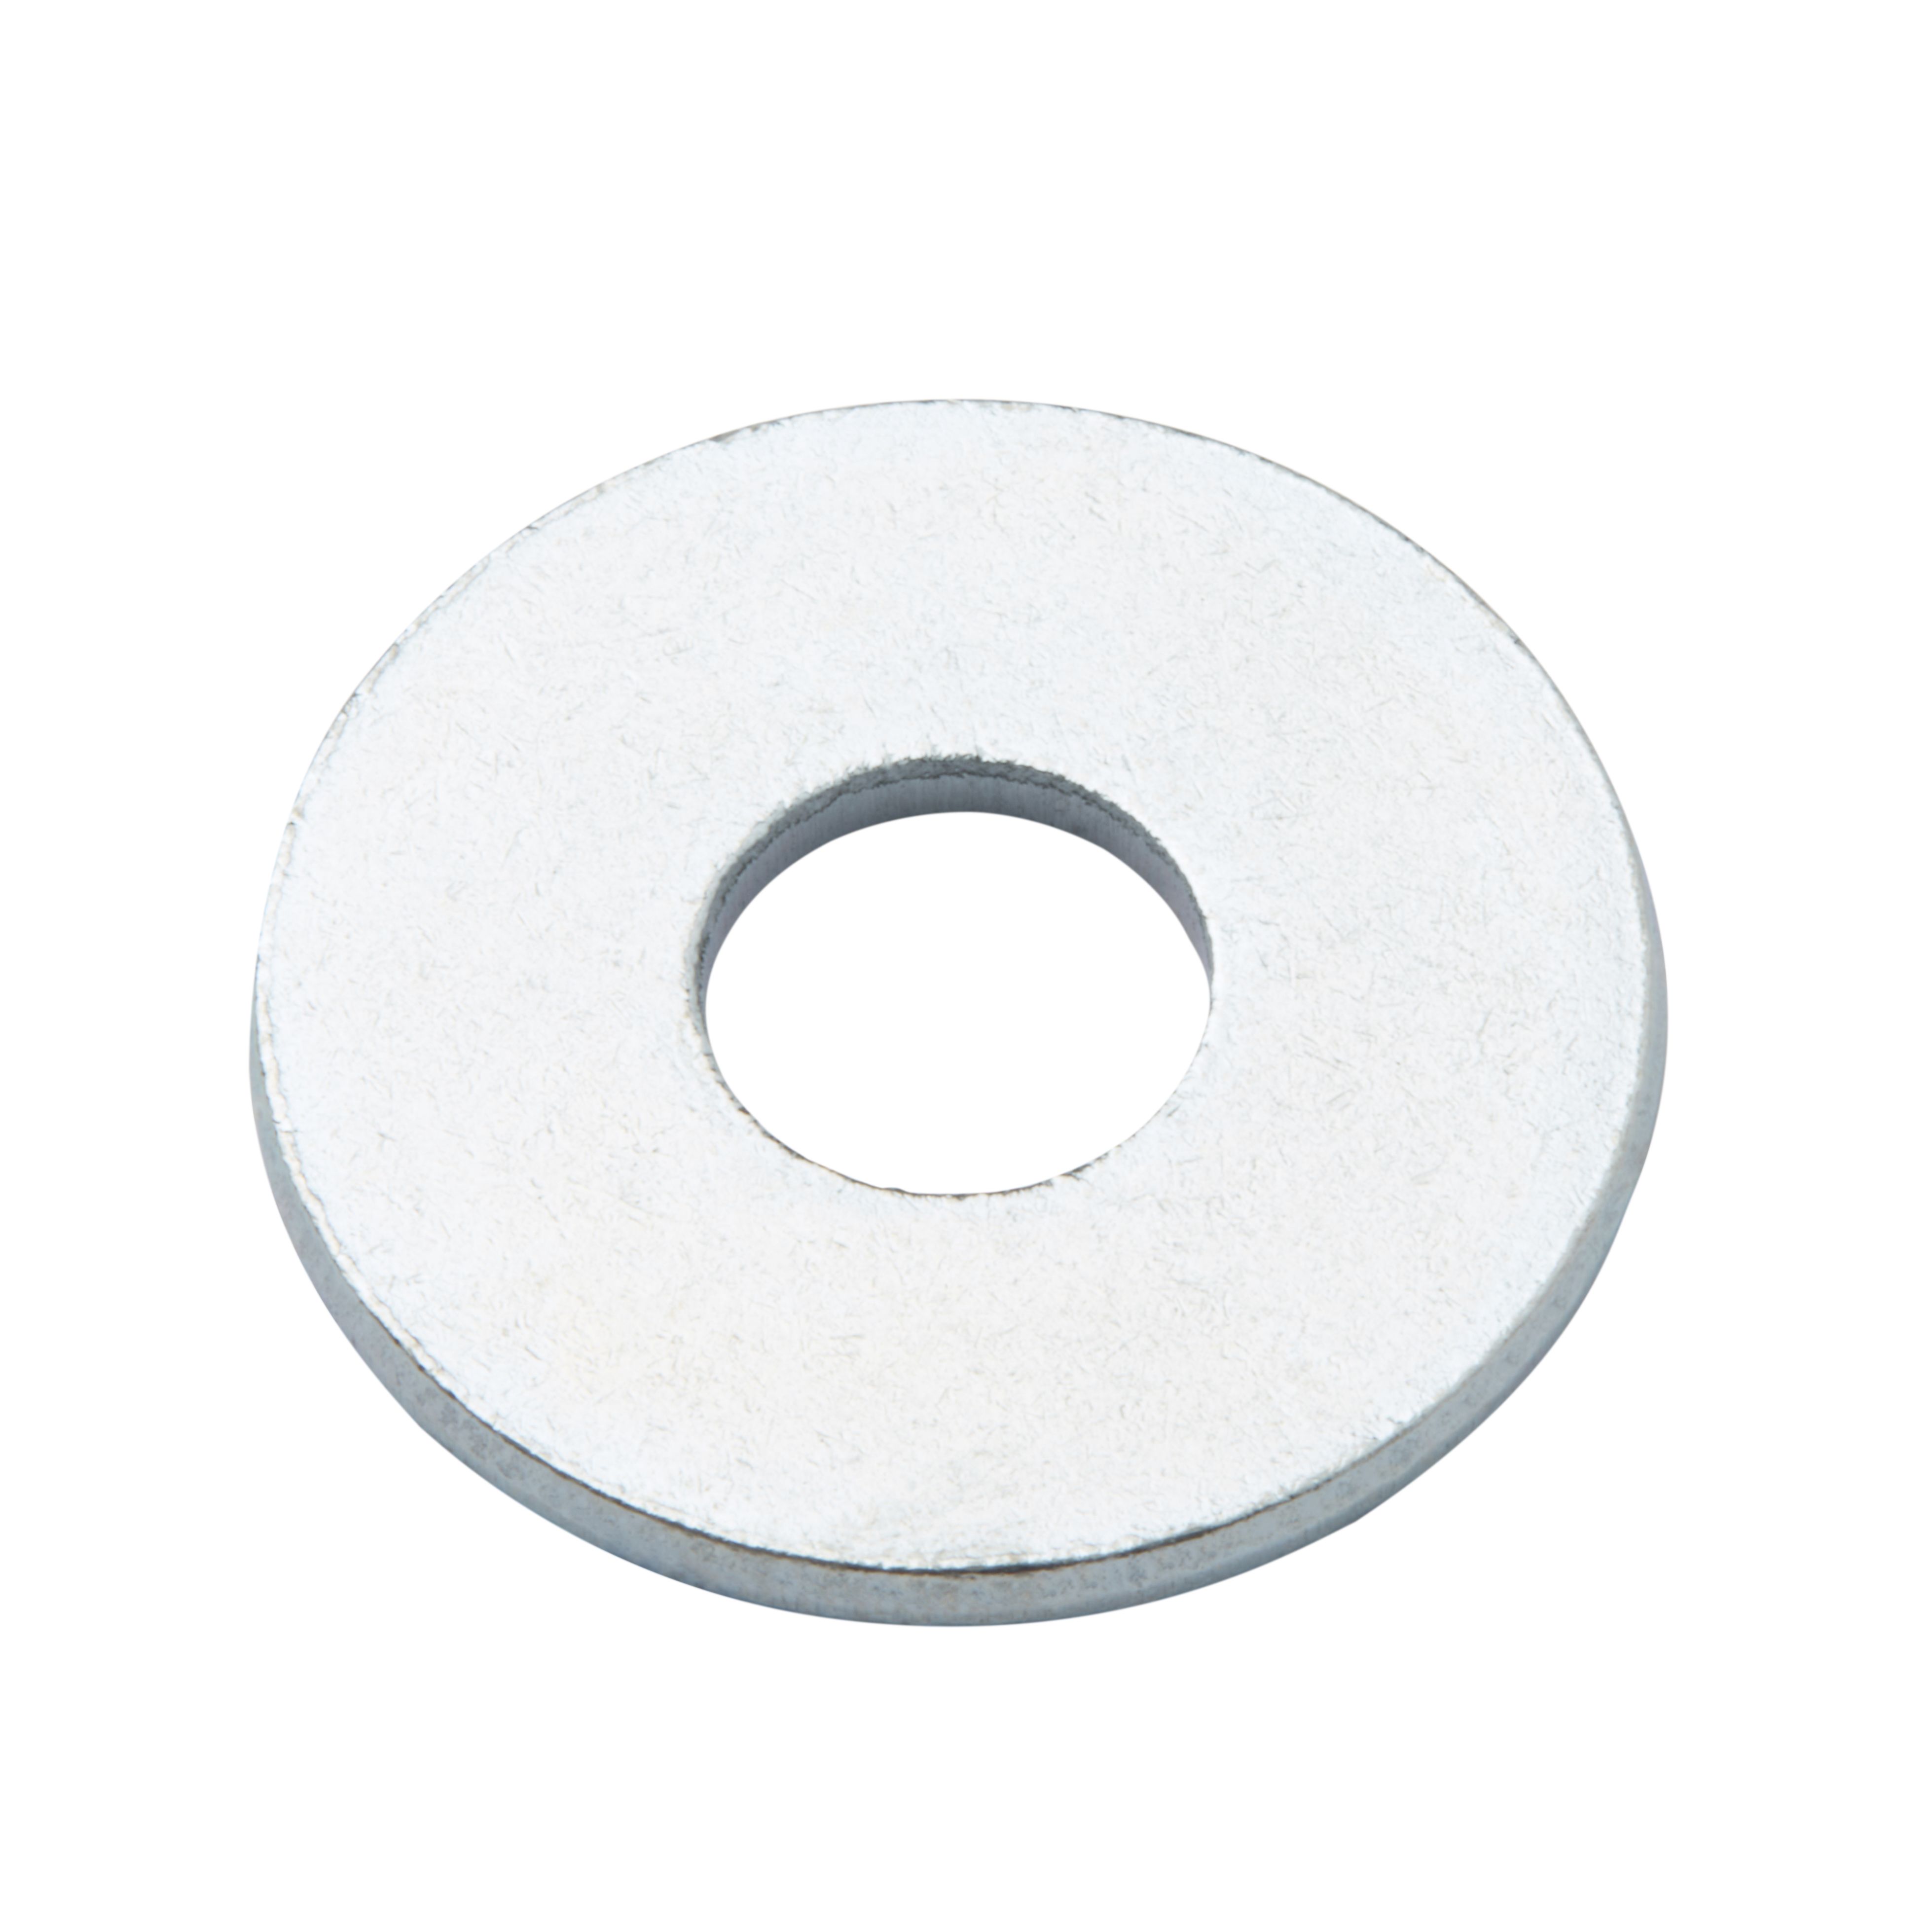 Diall M8 Carbon steel Flat Washer, (Dia)8mm, Pack of 10